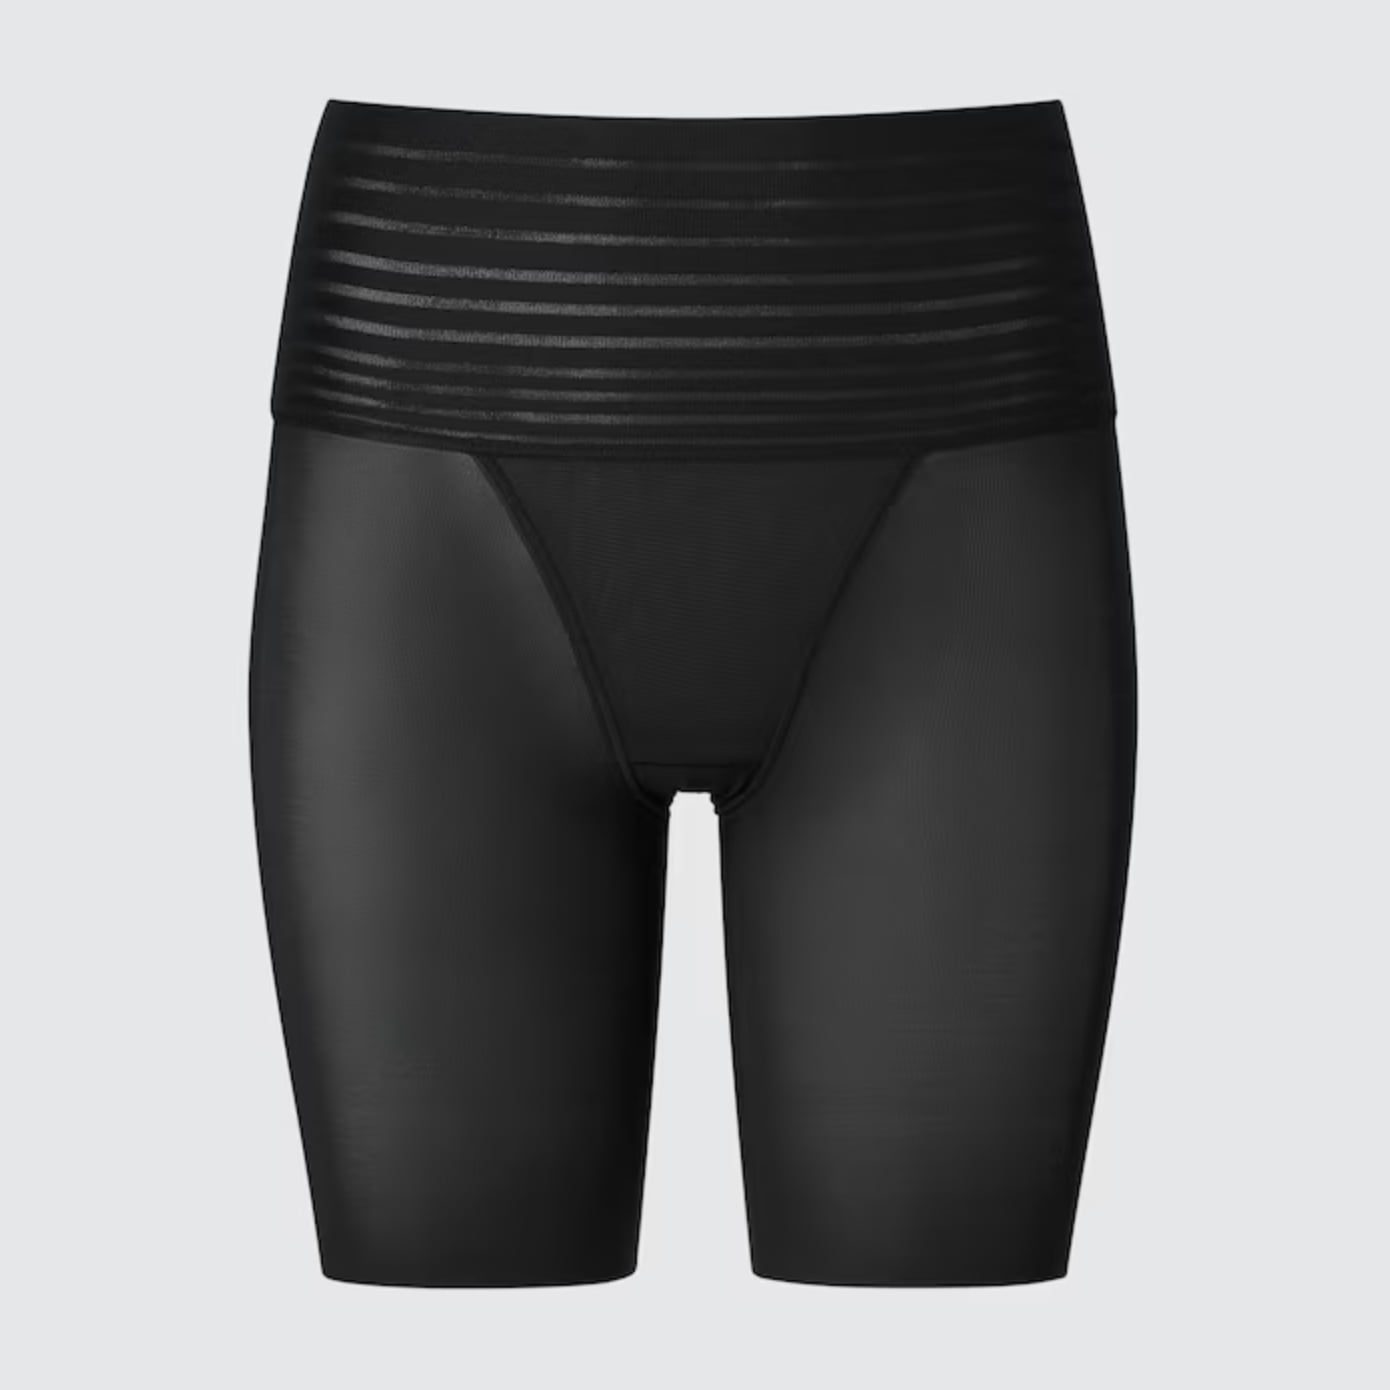 Uniqlo AIRism Smooth Body Shaper Unlined Half Shorts in Black ($15